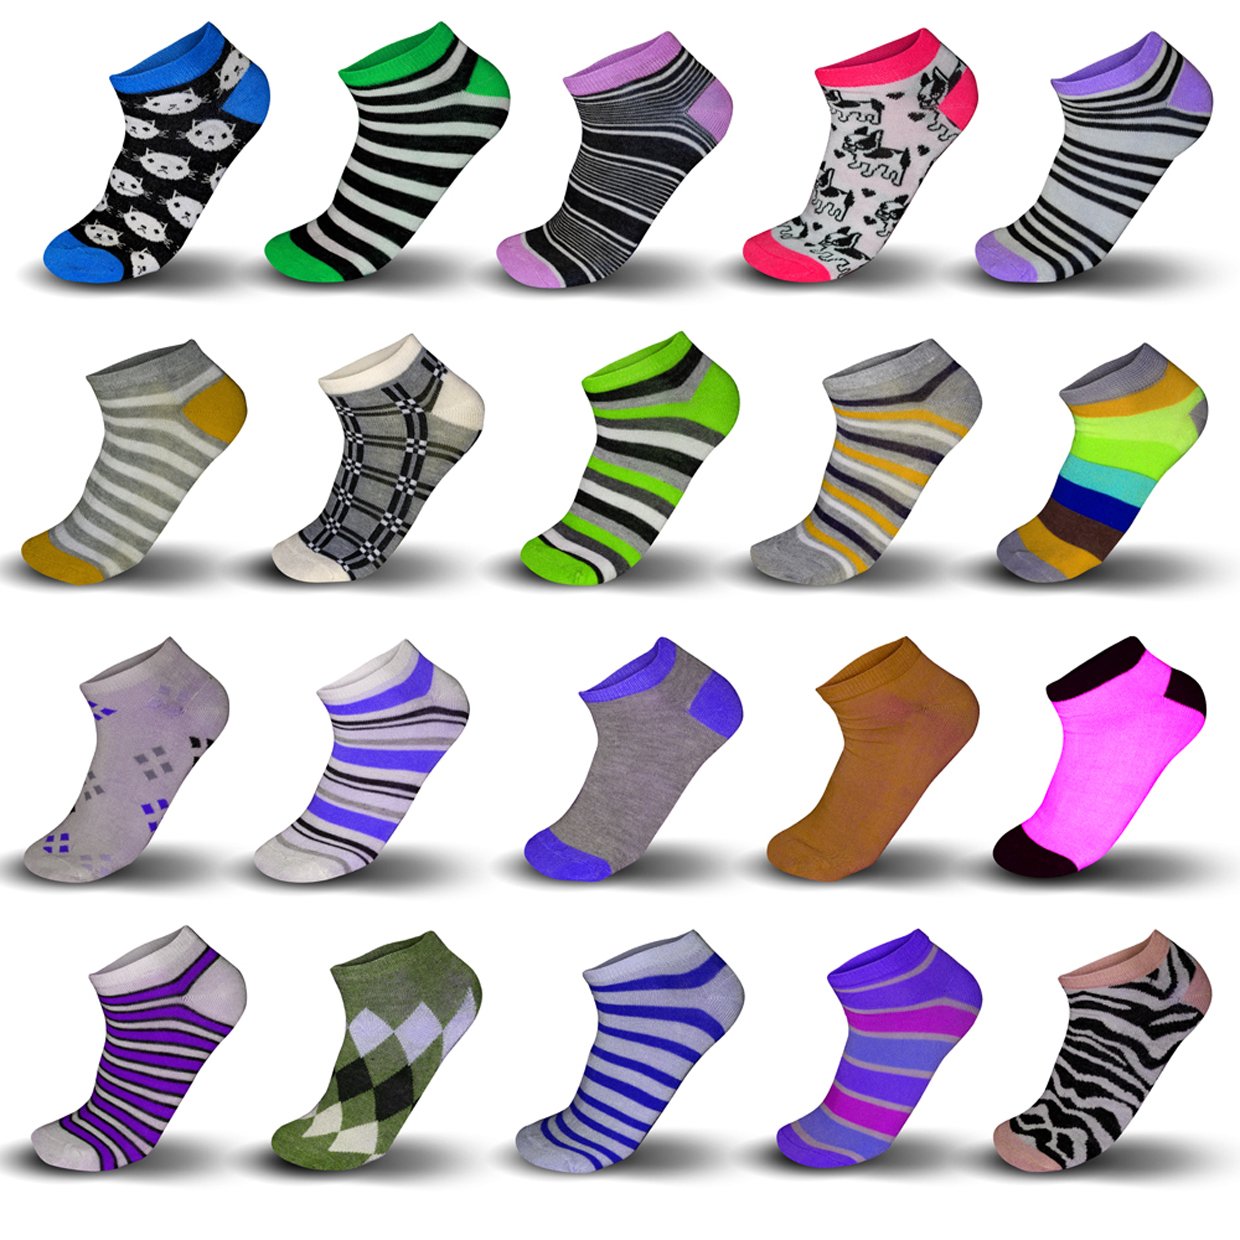 Generic Women’s Printed Ankle Socks, Set of 20 Assorted Pairs